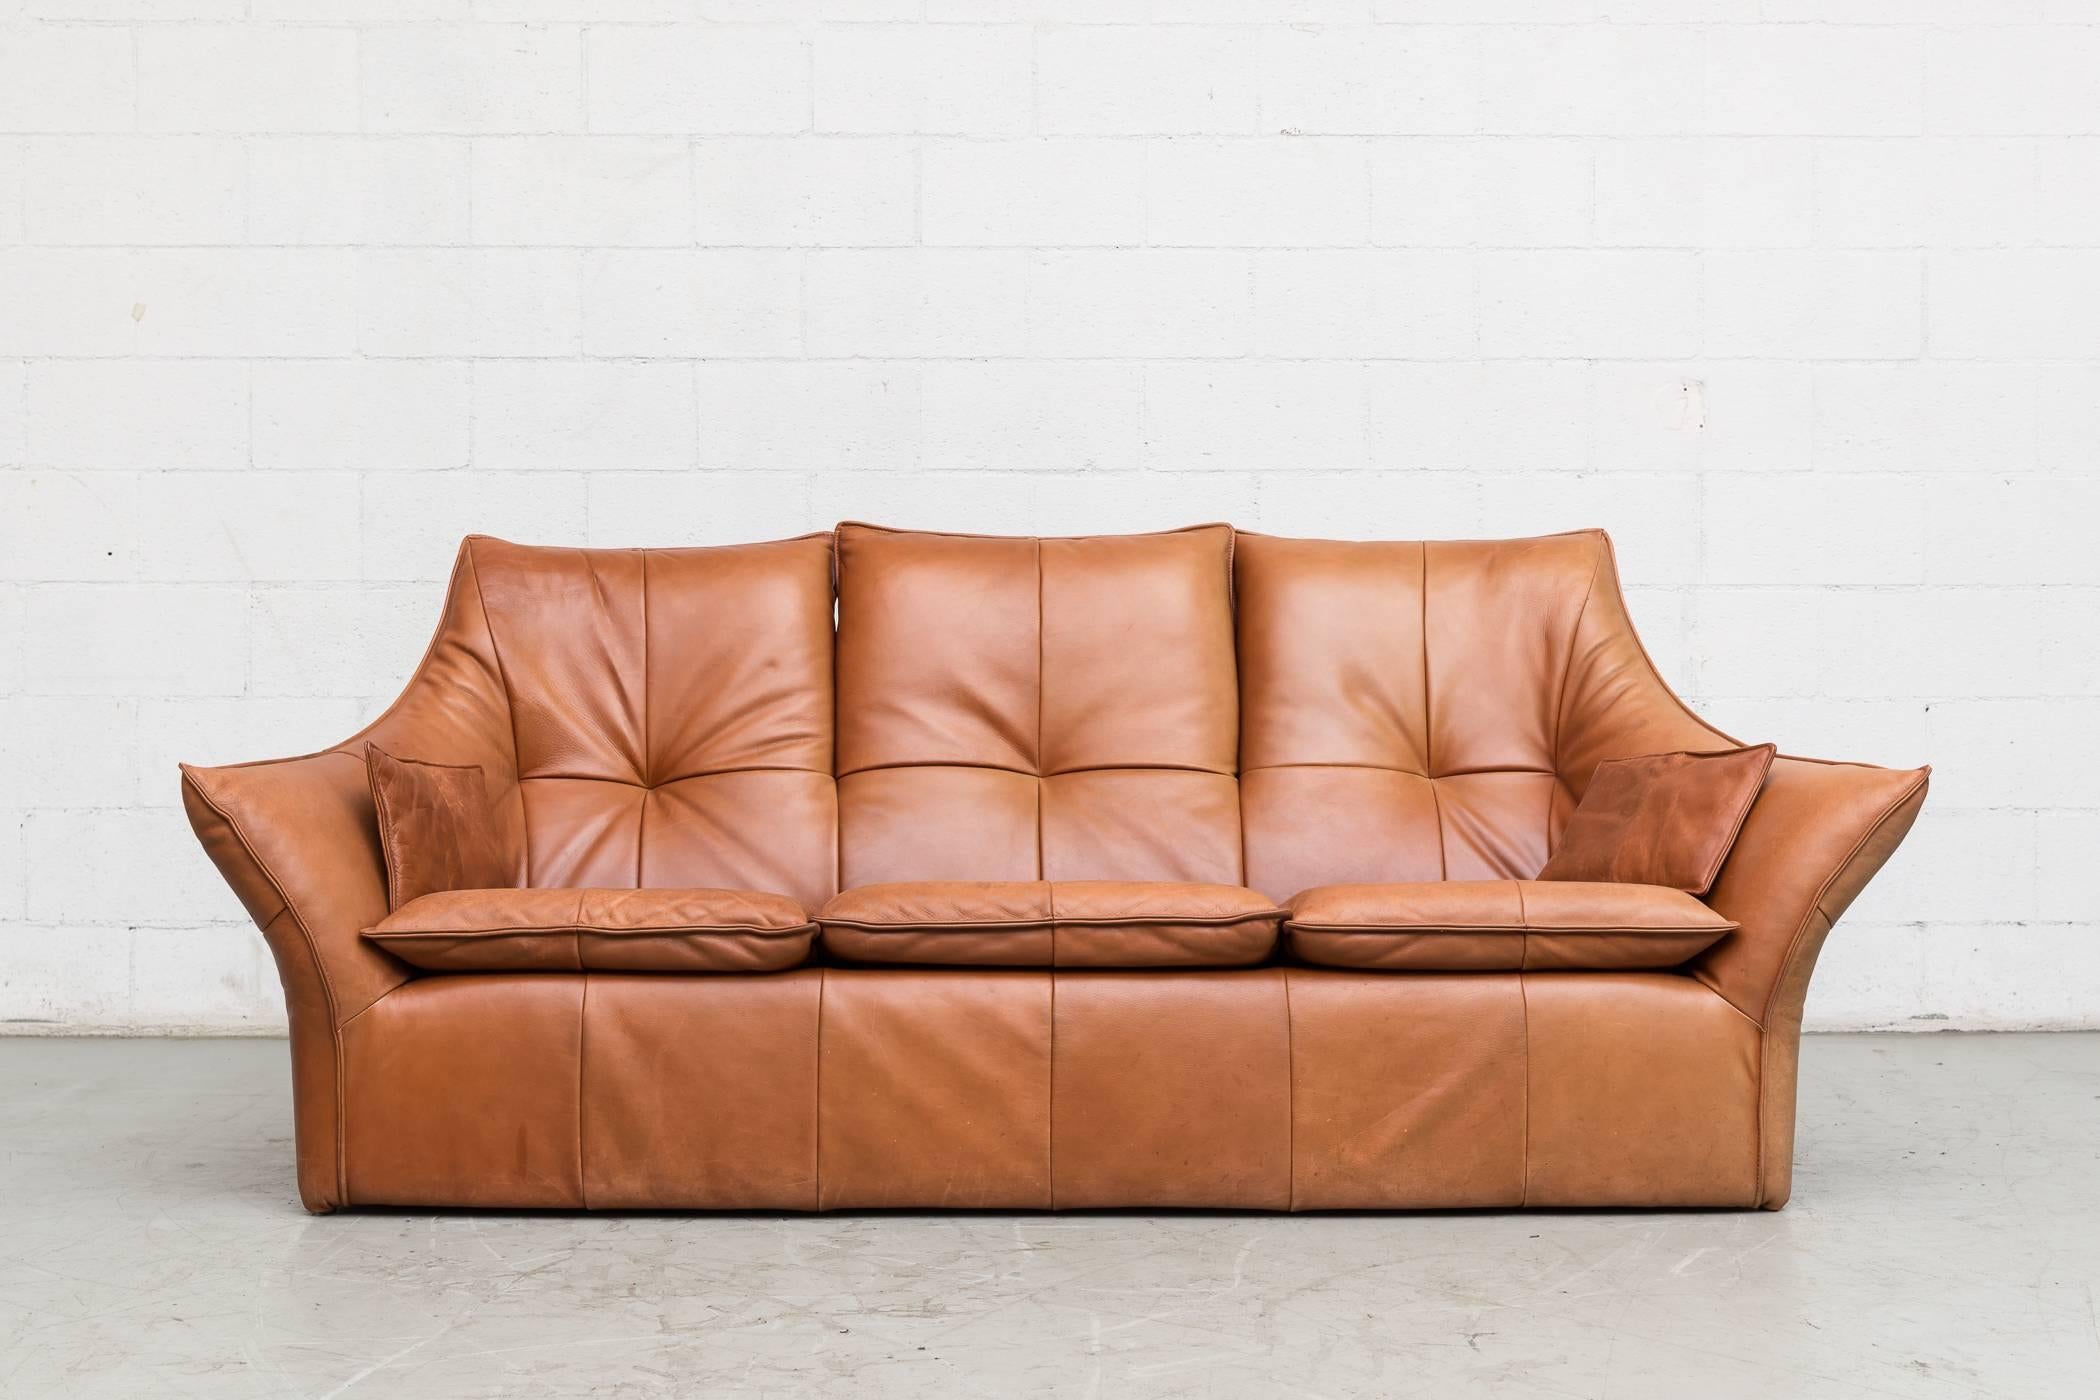 Thick cognac buffalo leather upholstered three-seat "DENVER" sofa by Gerard van den Berg for Montis. Was reupholstered in factory issued leather in the late 1970s. Good original condition front shows slight fading compared to the back.